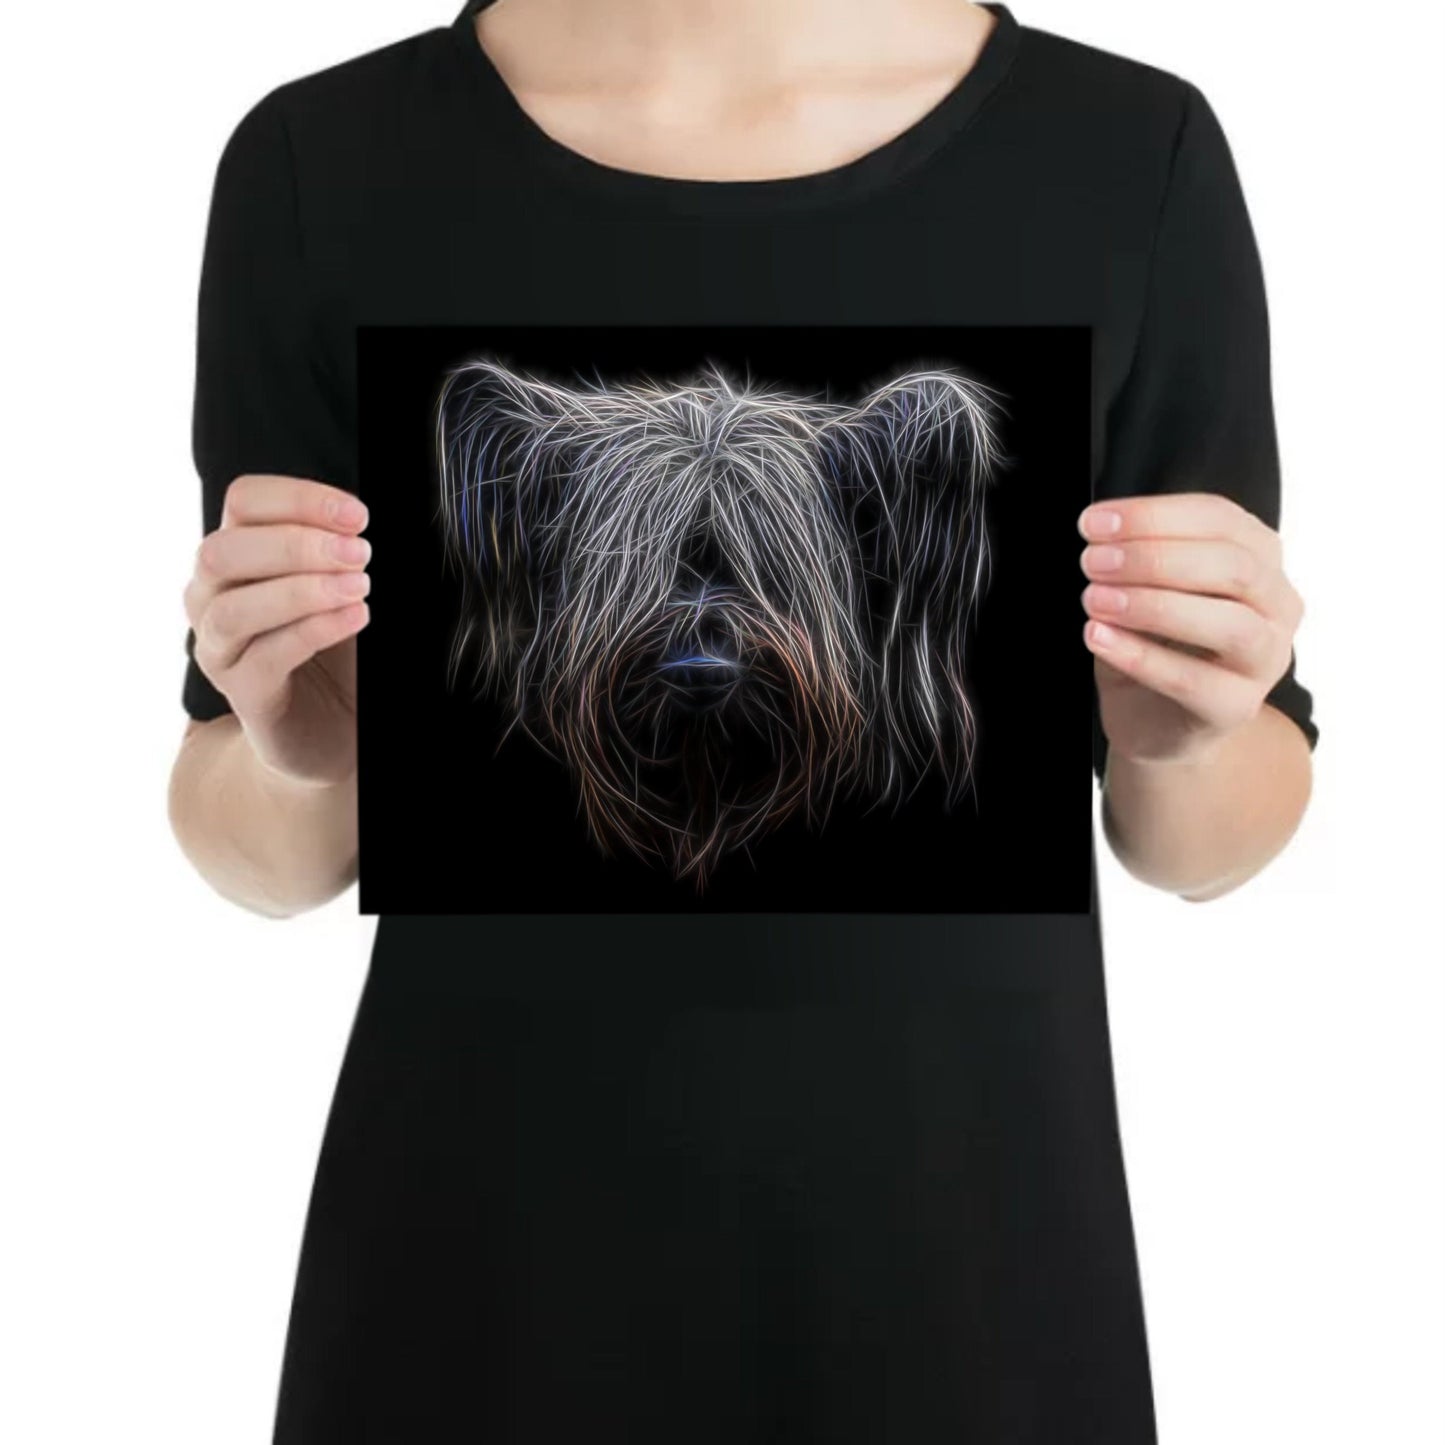 Skye Terrier Metal Wall Plaque with Stunning Fractal Art Design,  Perfect Skye Terrier Owner or Dog Lover Gift.